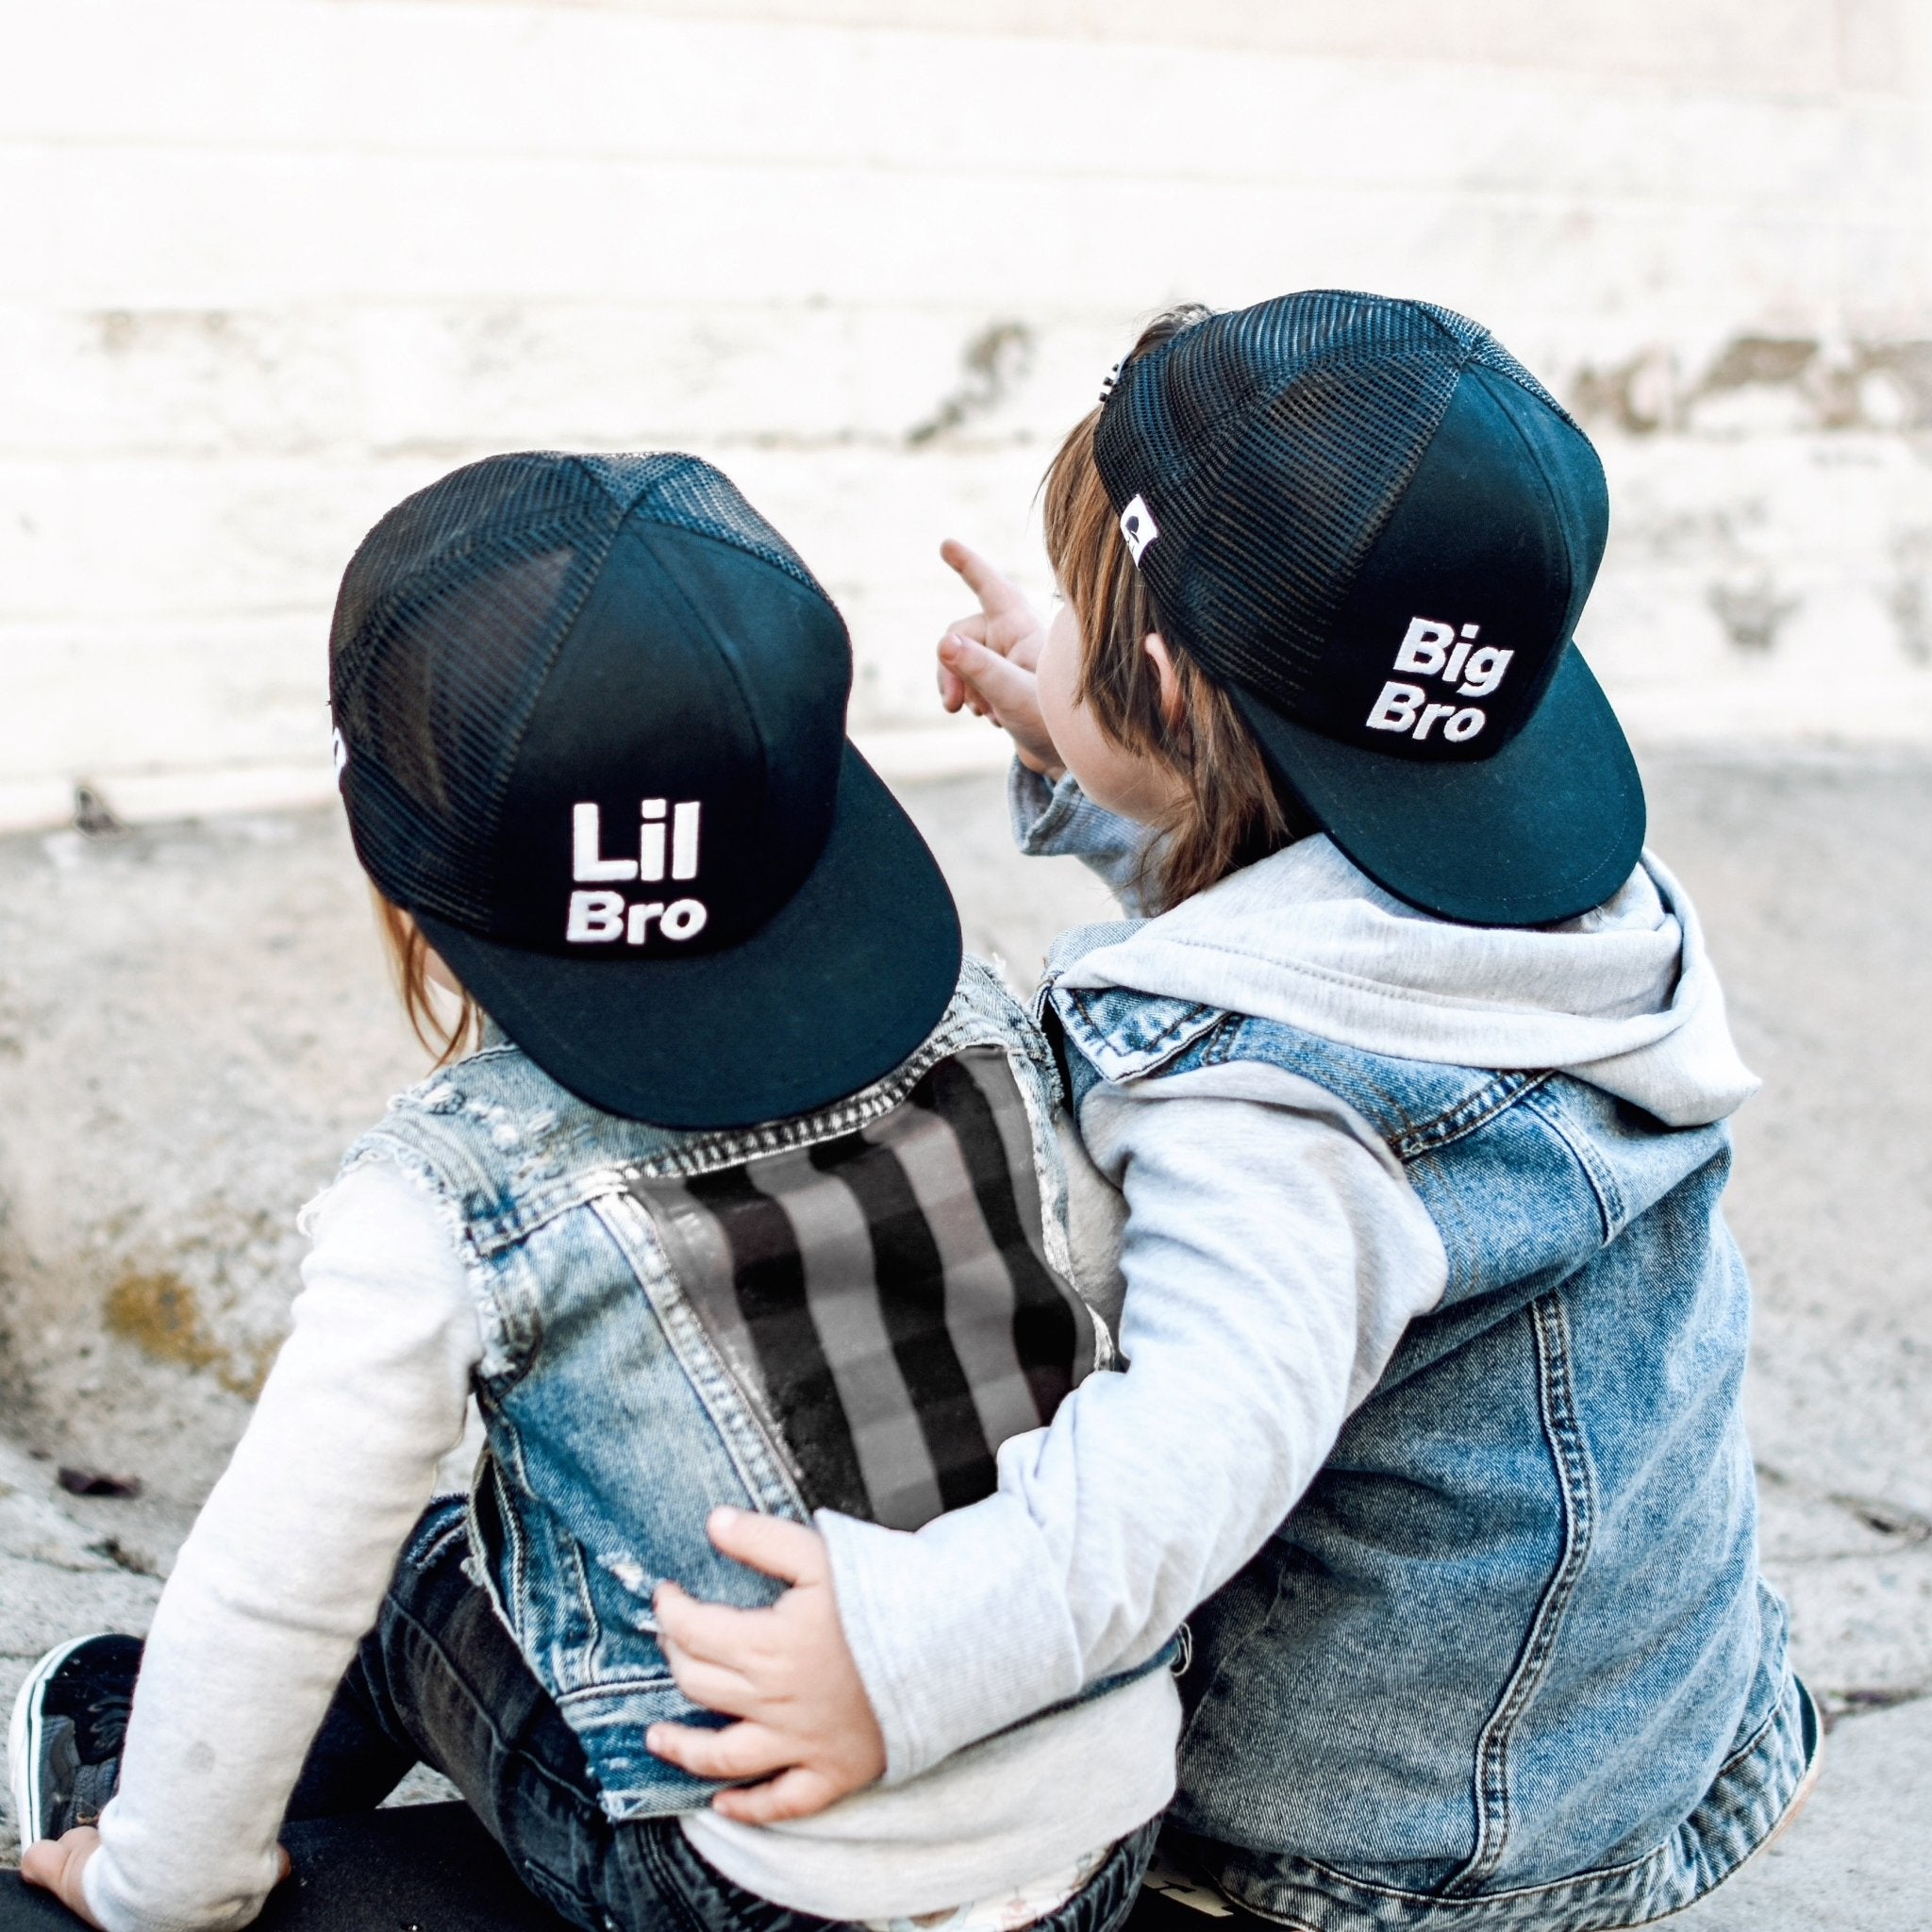 Picture of two boys in jean jackets one wearing lil bro trucker hat and the other wearing big bro trucker hat